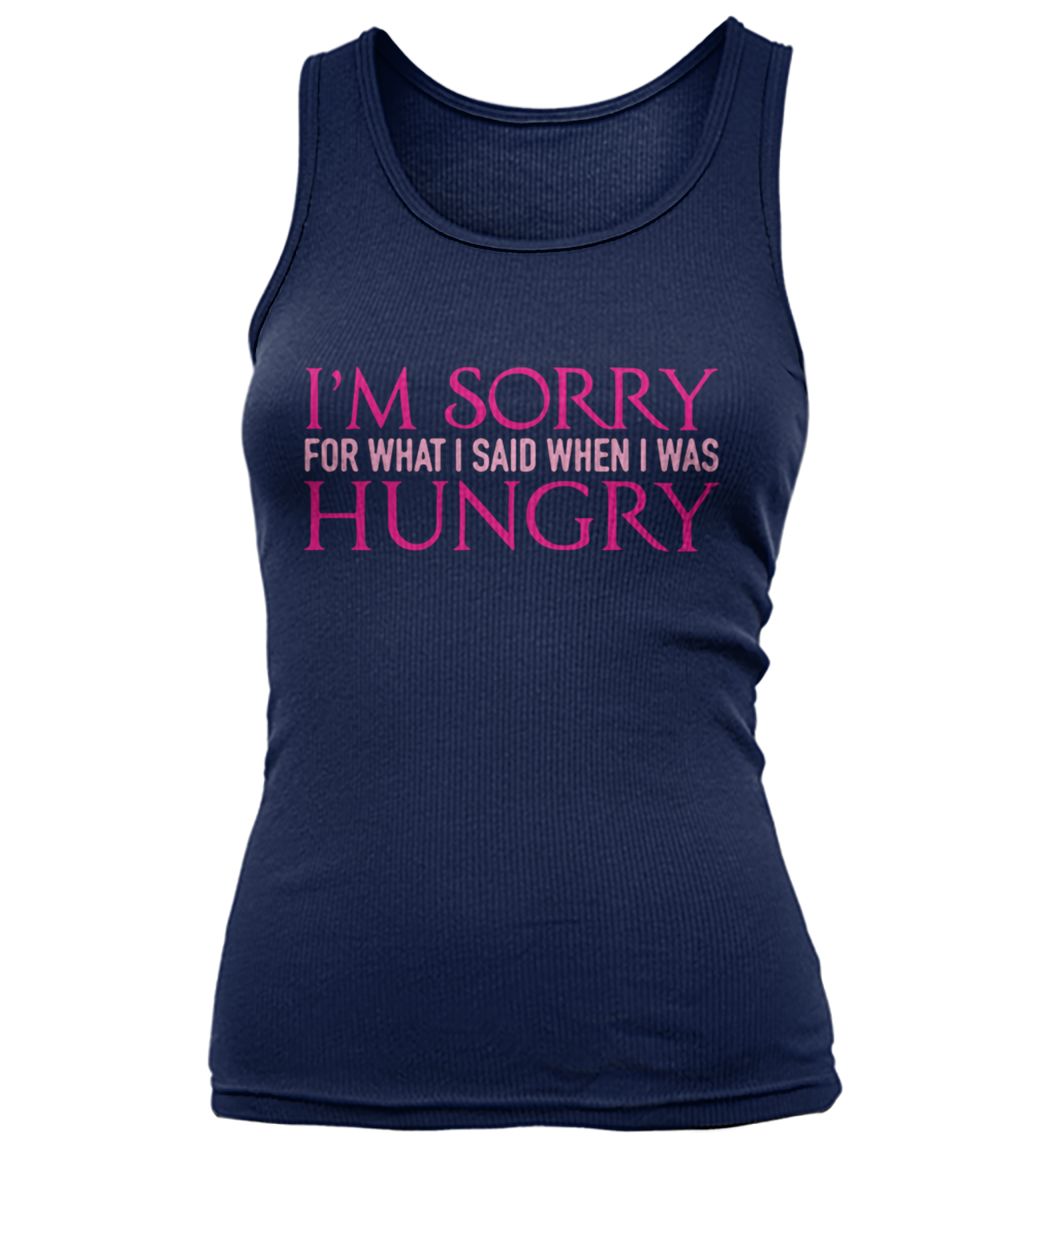 I'm sorry for what I said when I was hungry women's tank top